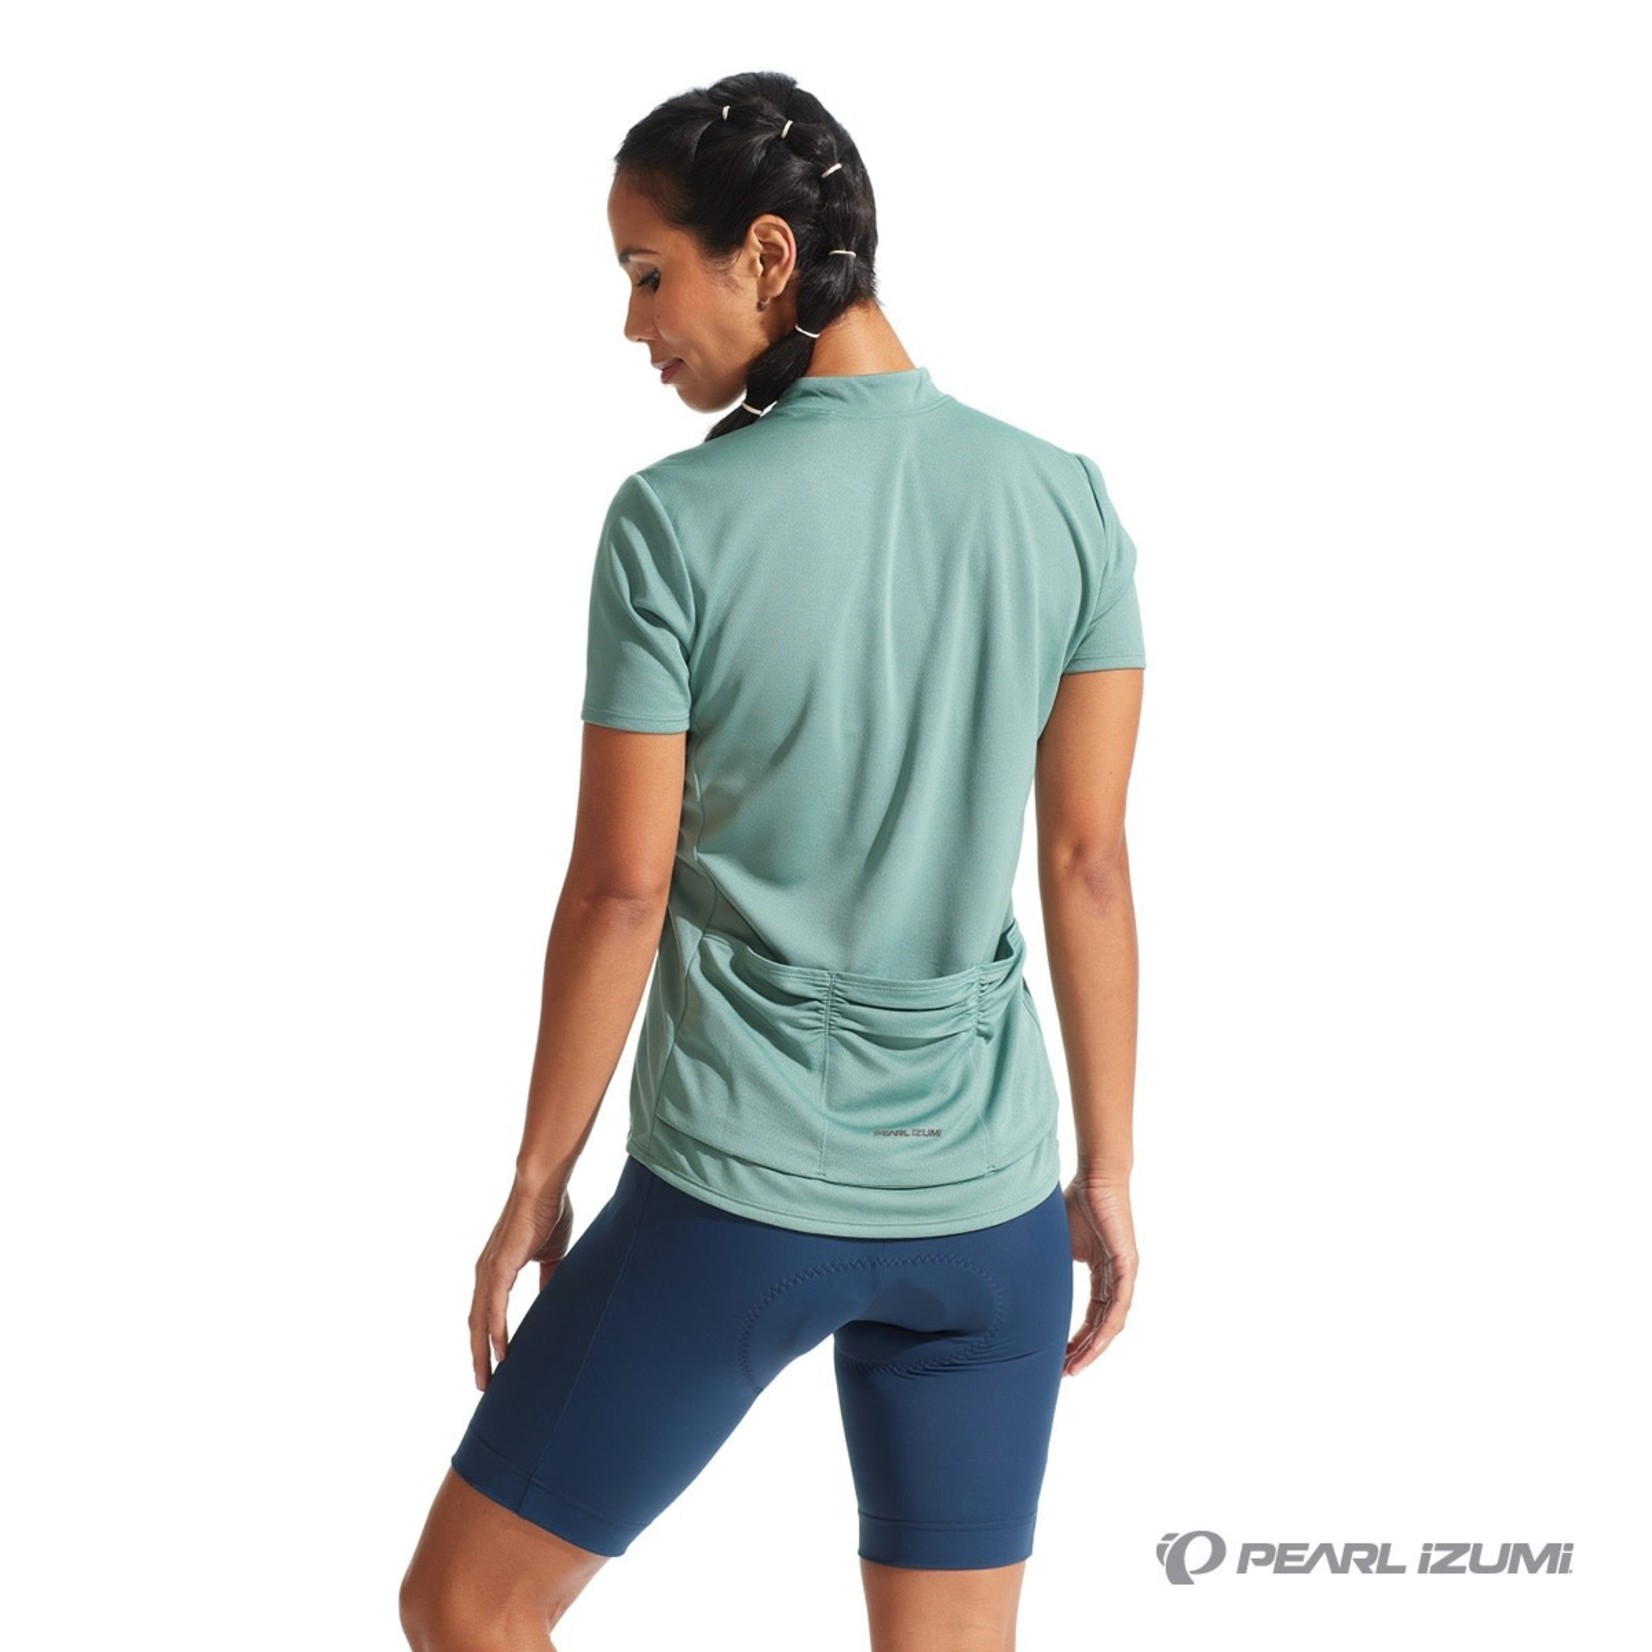 Pearl Izumi Pearl Izumi Quest Women's Jersey - Pale Pine/Serene Green Recycled Polyester